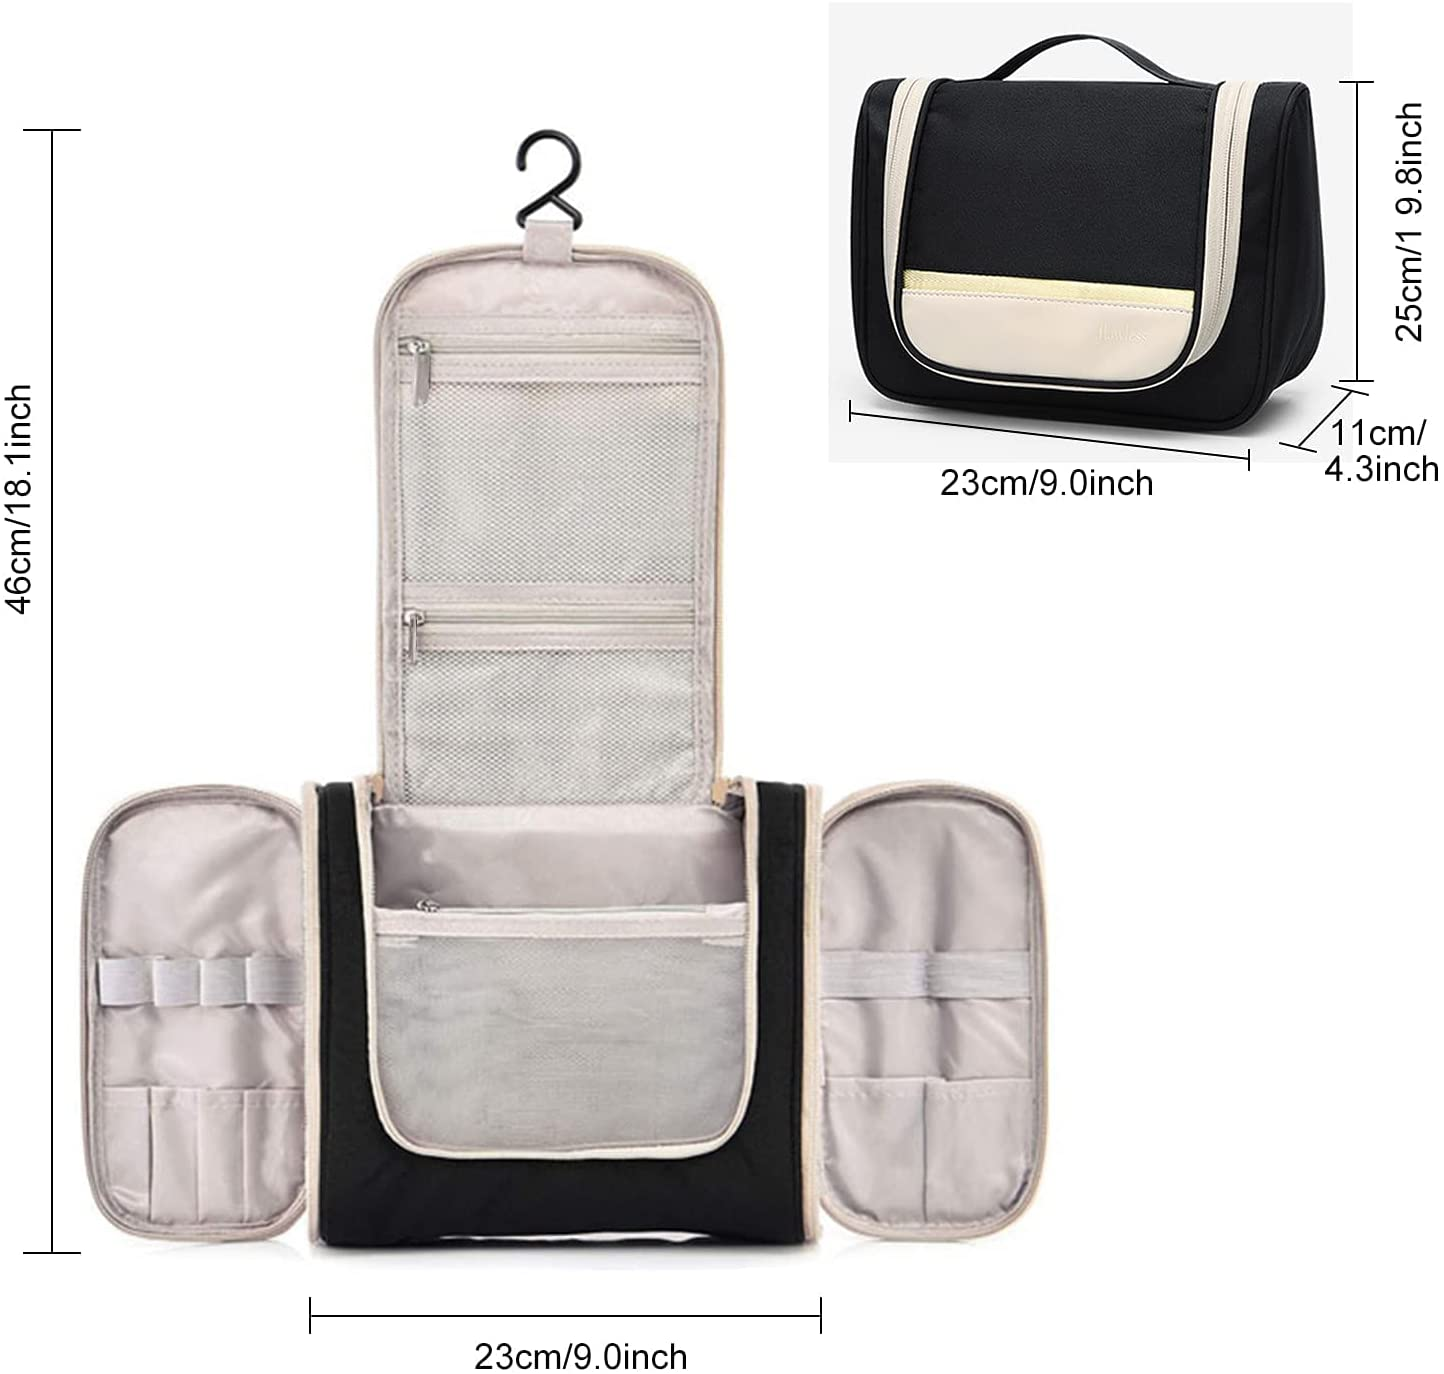 Hanging Travel Toiletry Bag: Portable Waterproof Polyester Cosmetic Travel Makeup Organizer for Women and Men- Shower Bags for Traveling, Brushes Set, Toiletries, Shaving Kit